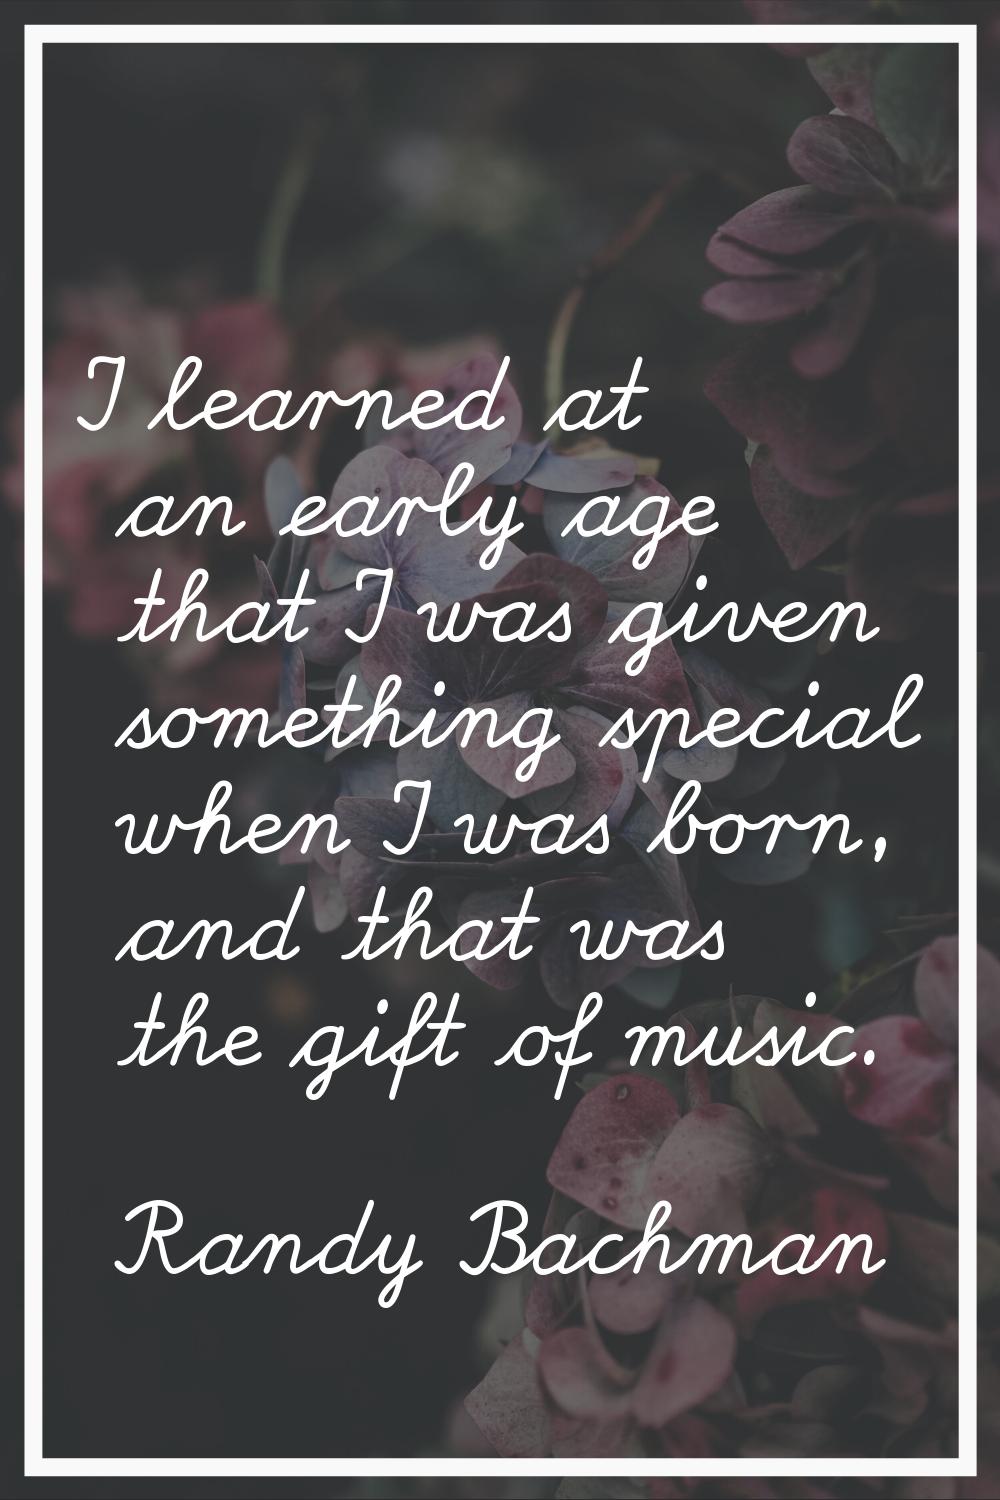 I learned at an early age that I was given something special when I was born, and that was the gift